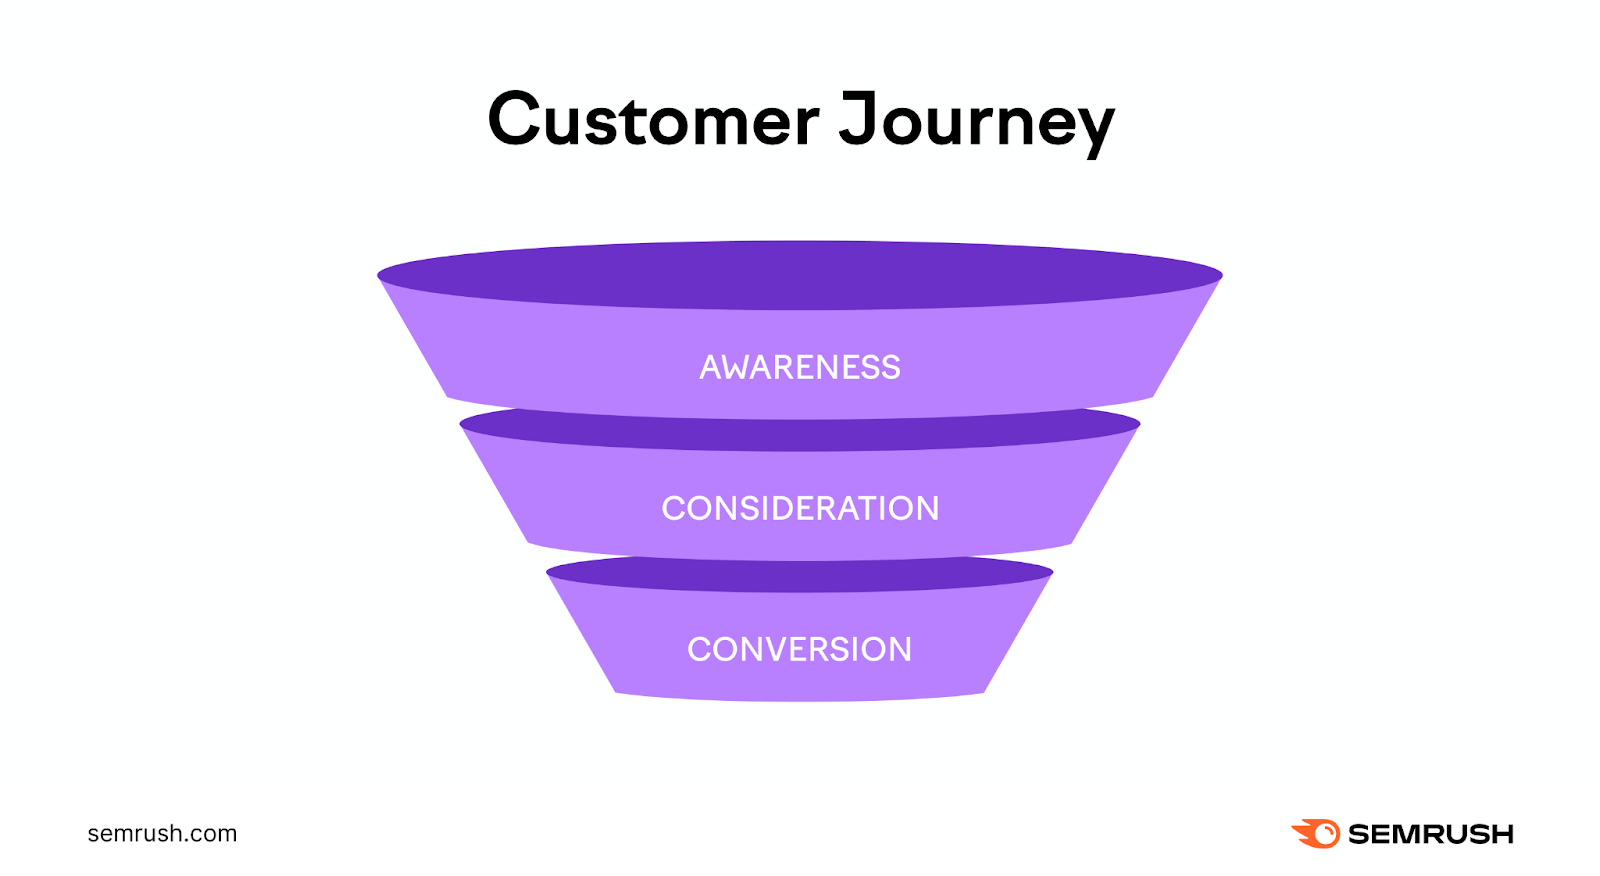 A visual of a simple customer journey, including awareness, consideration and conversion stages